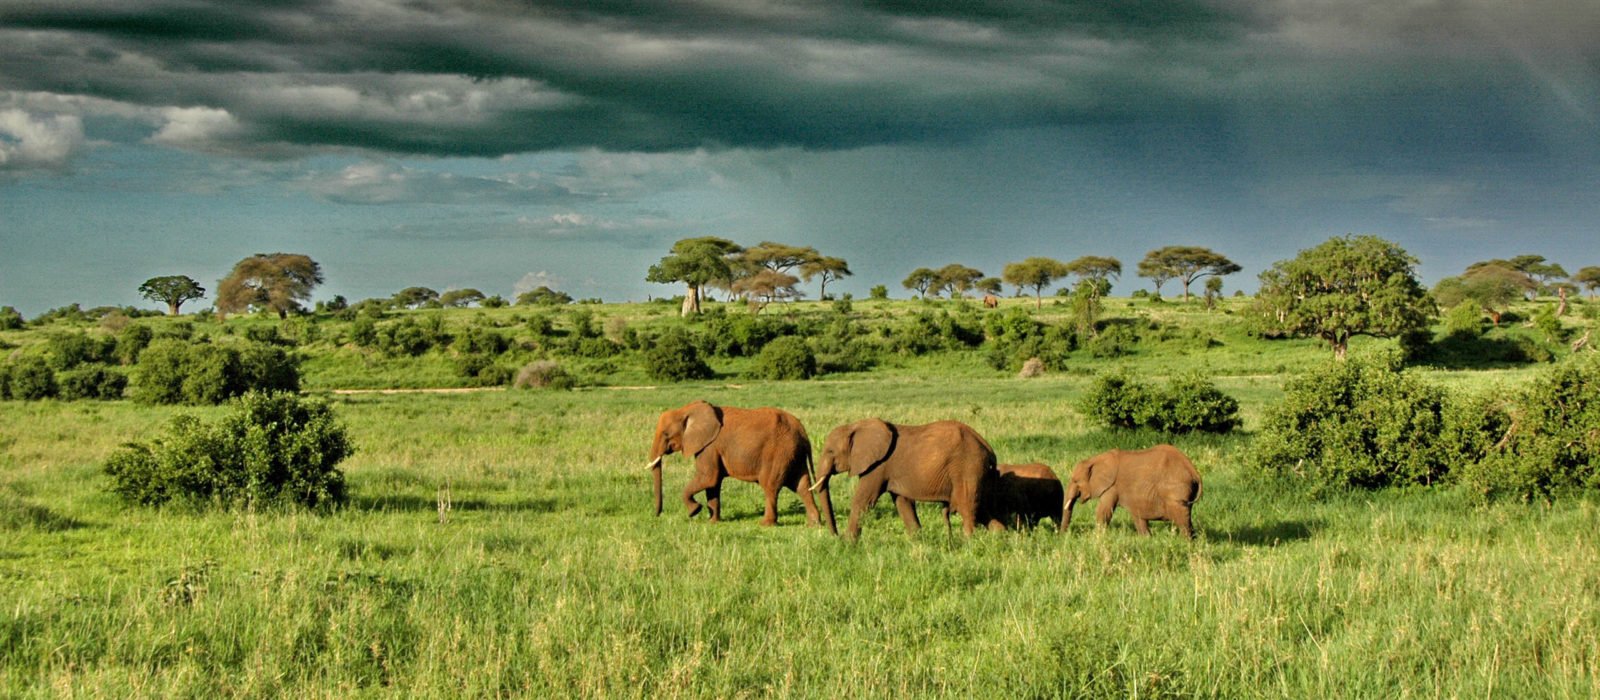 Olivers-Camp-Elephants-under-dramatic-clouds